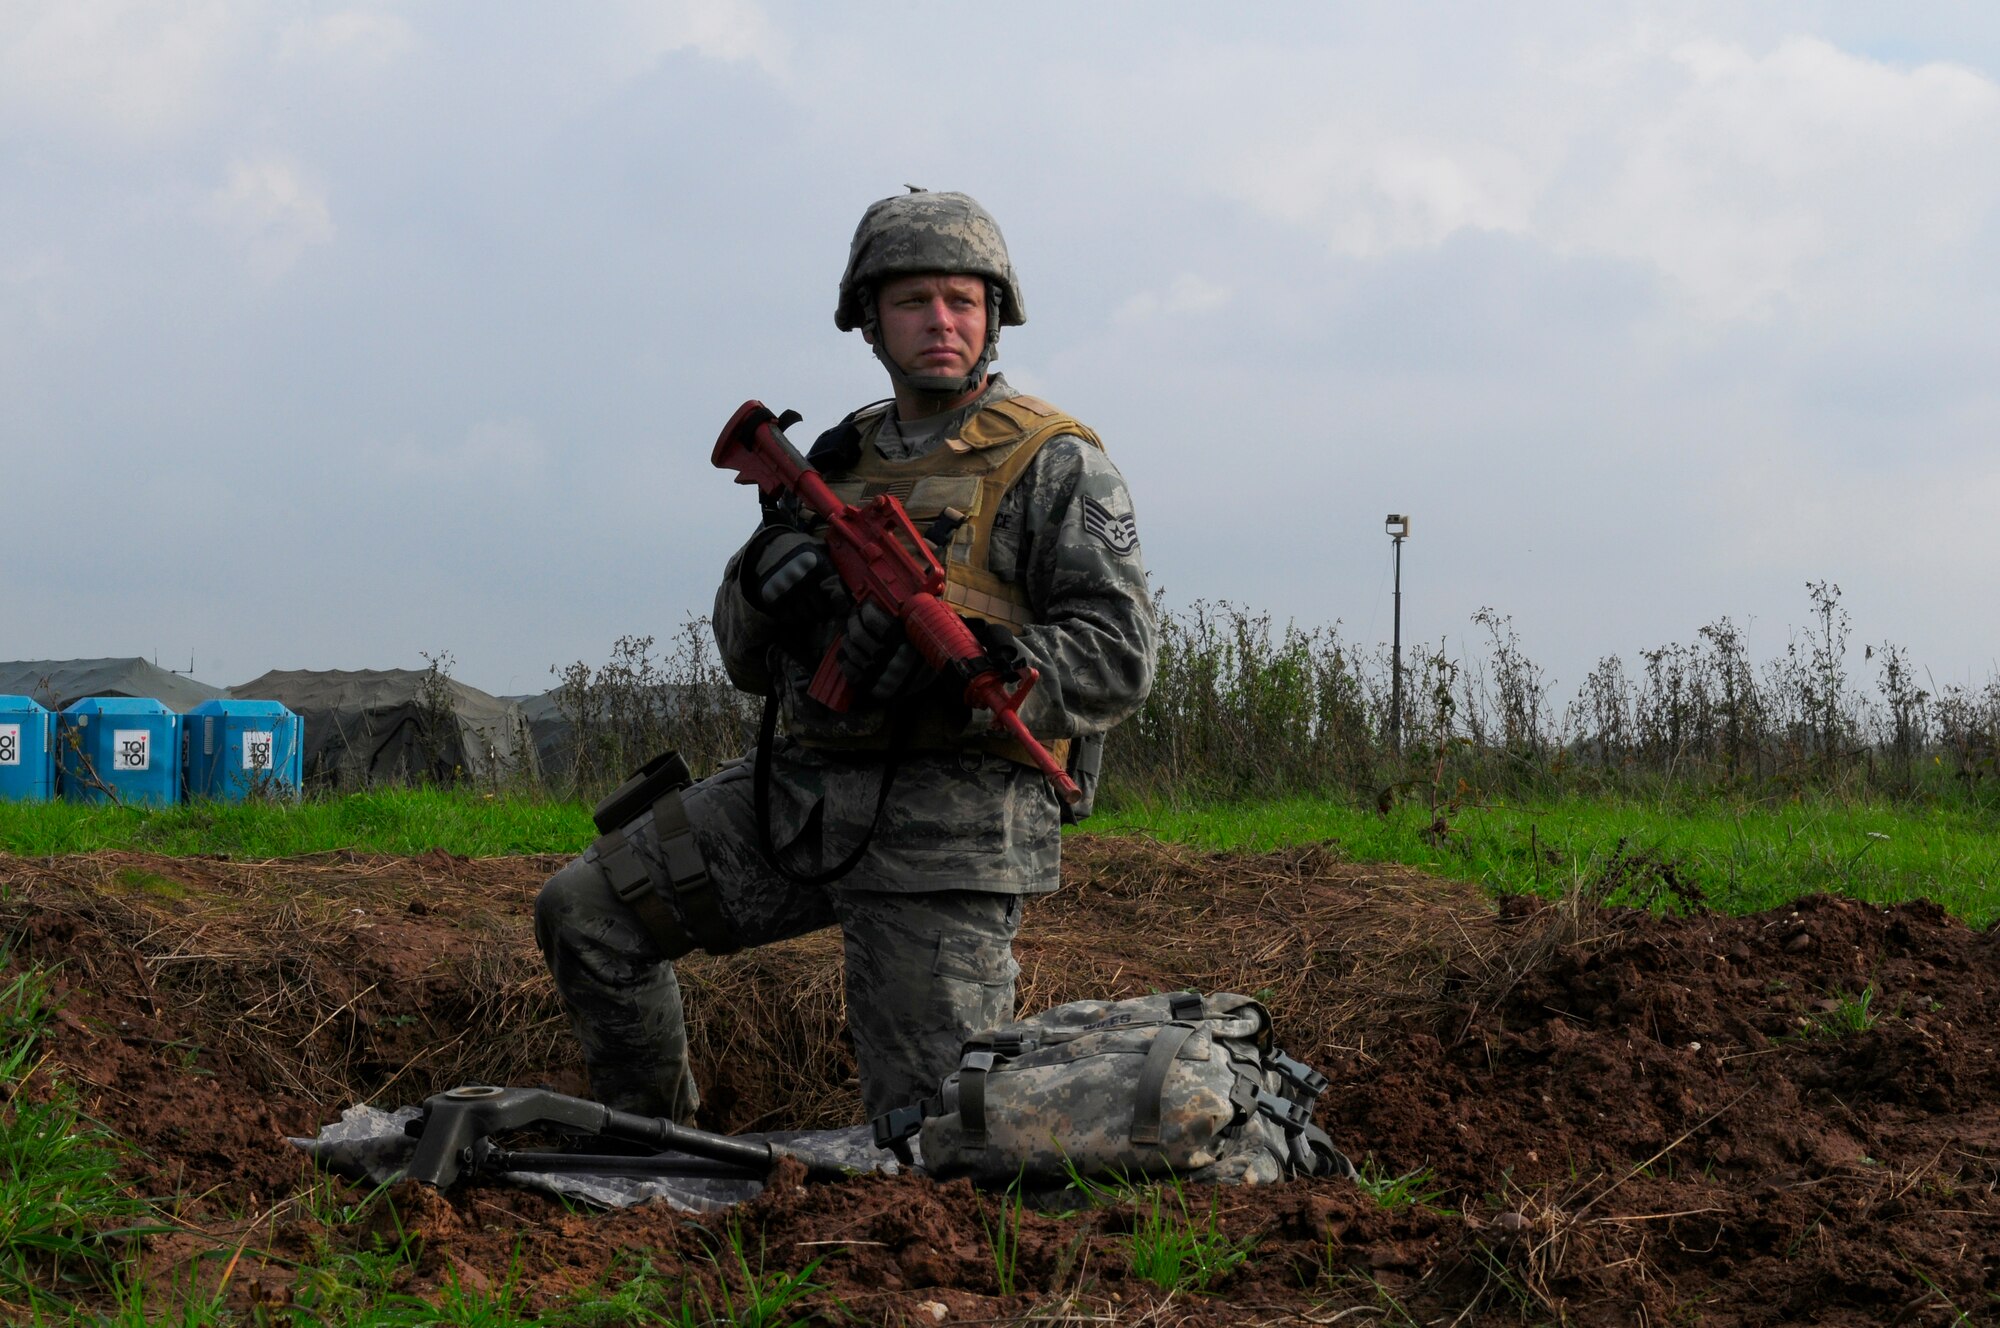 U.S. Air Force Staff Sgt. Darren Wiles, 435th Security Forces Squadron, stands as over watch to ensure safety of personnel during an Operational Readiness Inspection, Flugplatz Bitburg, Germany, Sept. 29, 2010.The ORI is designed to test Airmen?s ability to survive, operate and perform fundamental duties in a war time environment. (U.S. Air Force photo by Airman Kendra Alba)